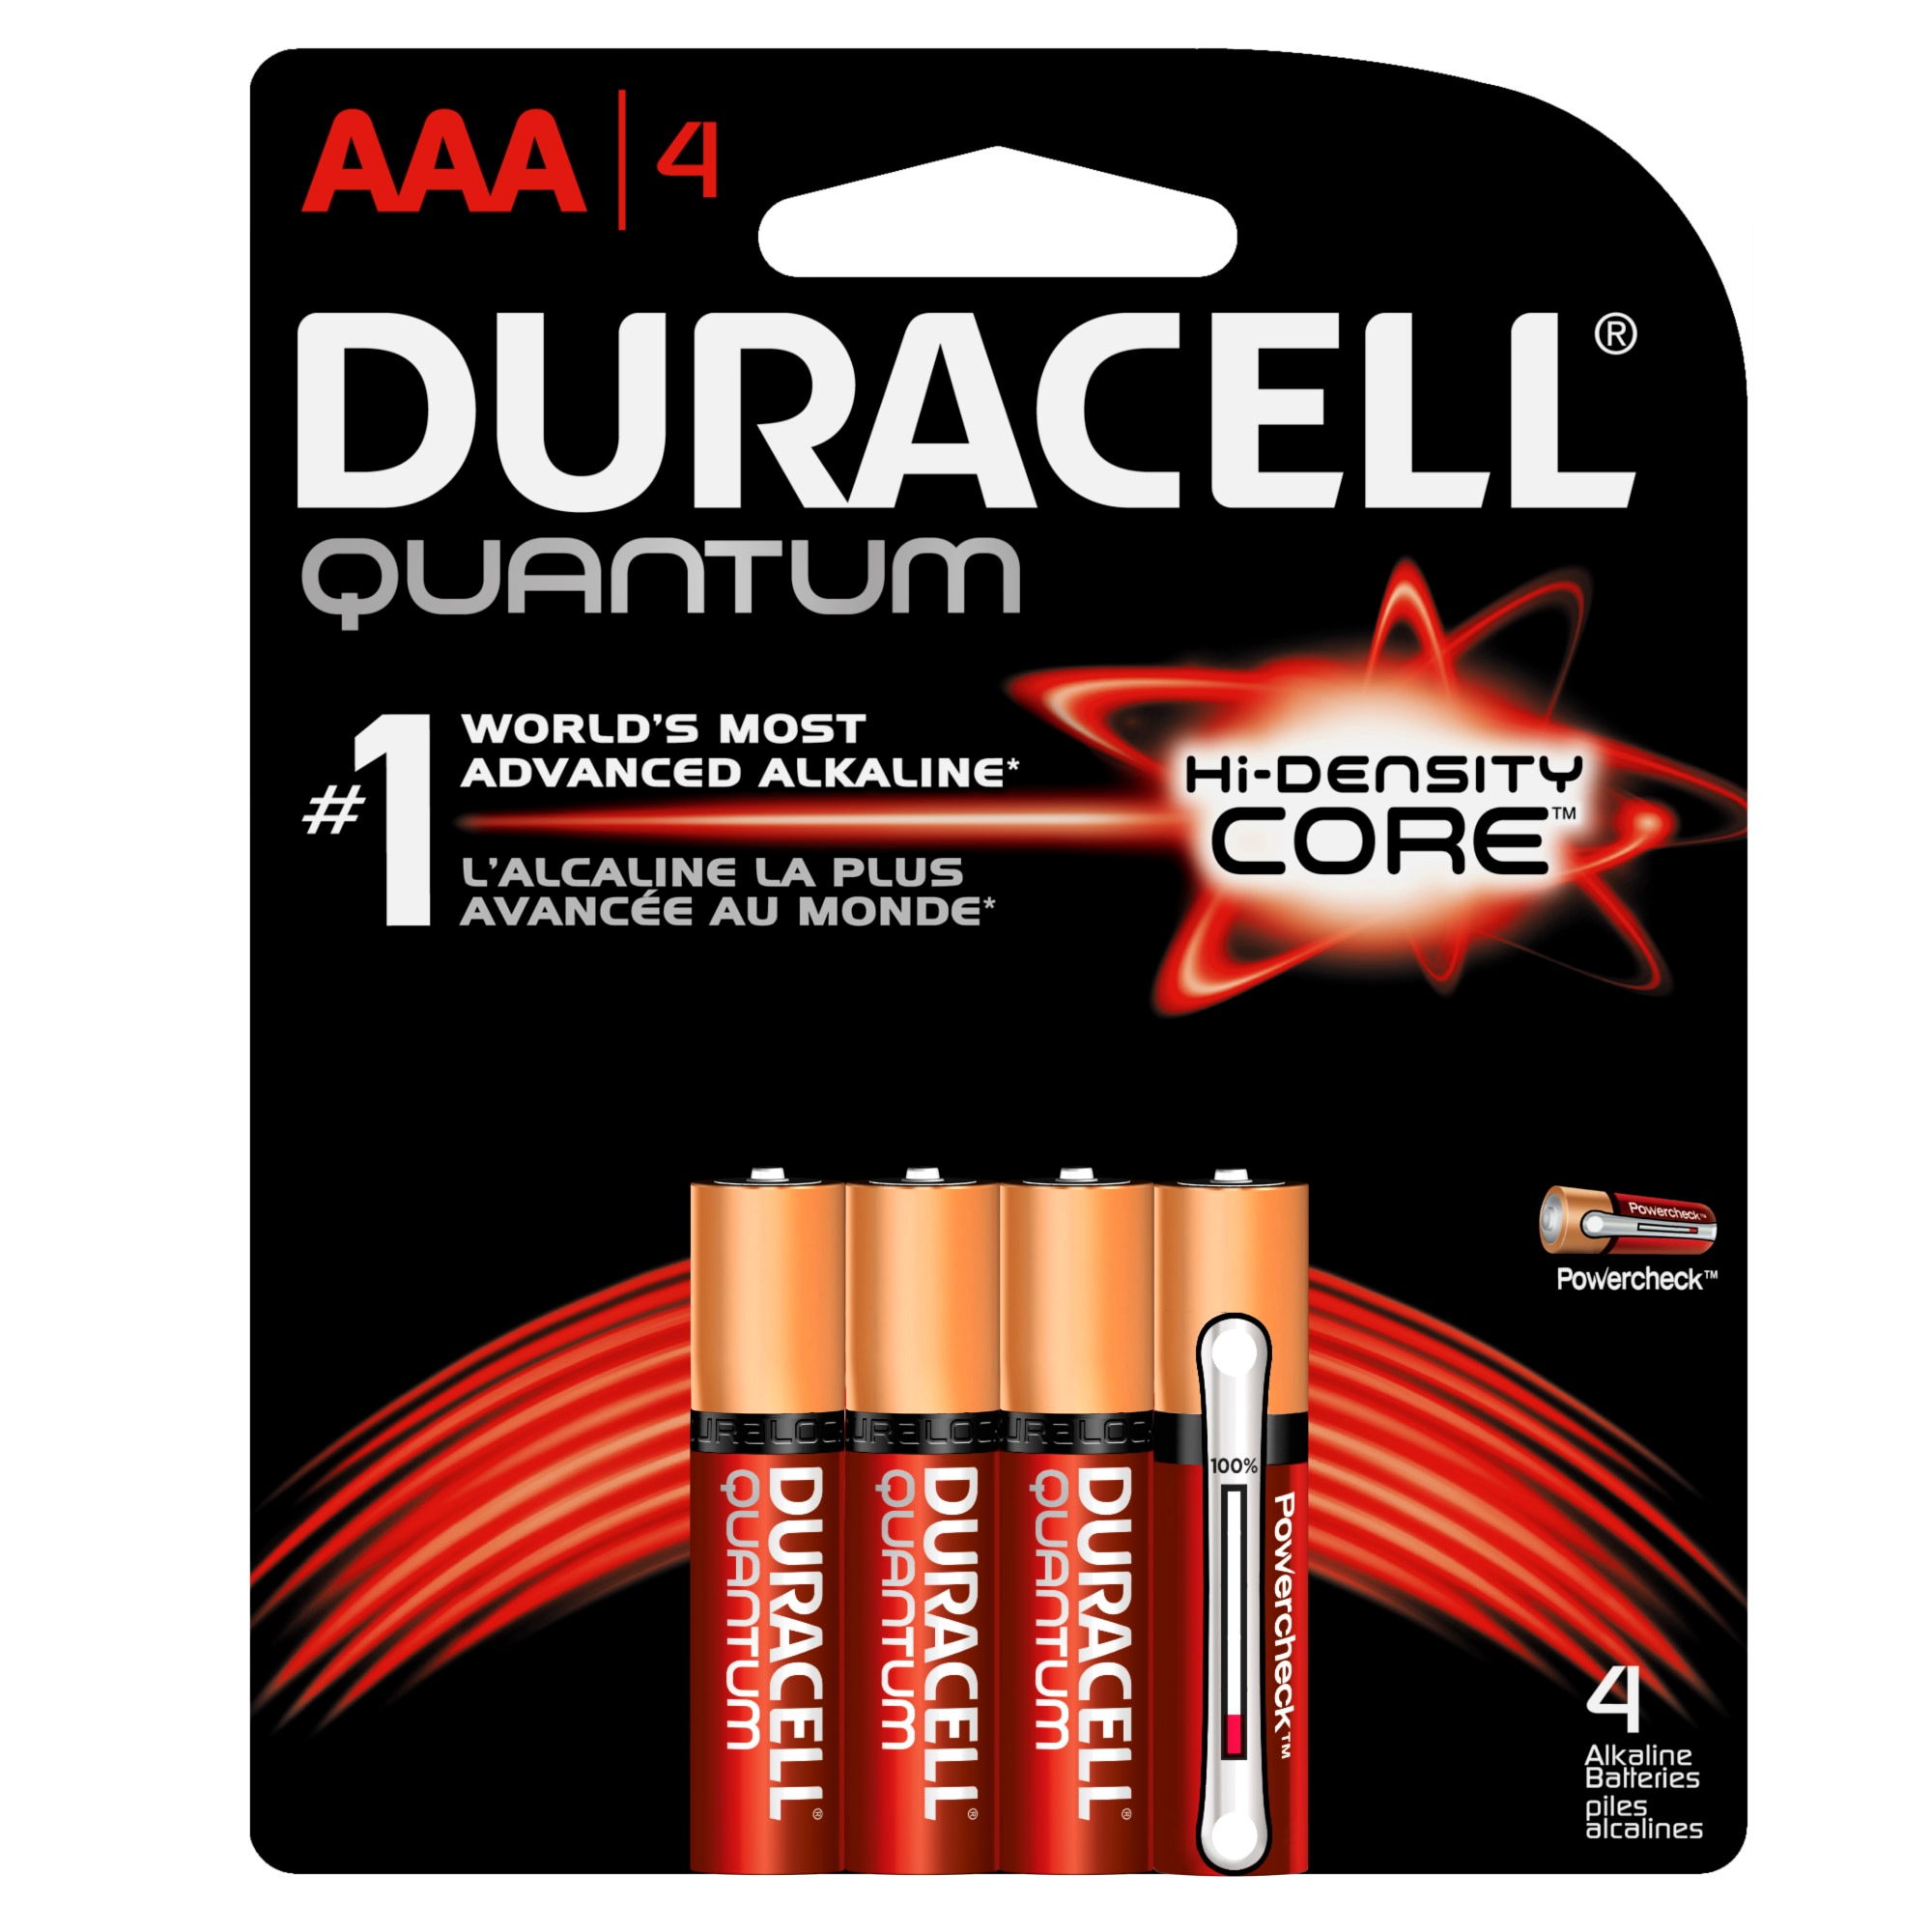 Duracell Quantum Alkaline AAA Batteries (4-Pack) at